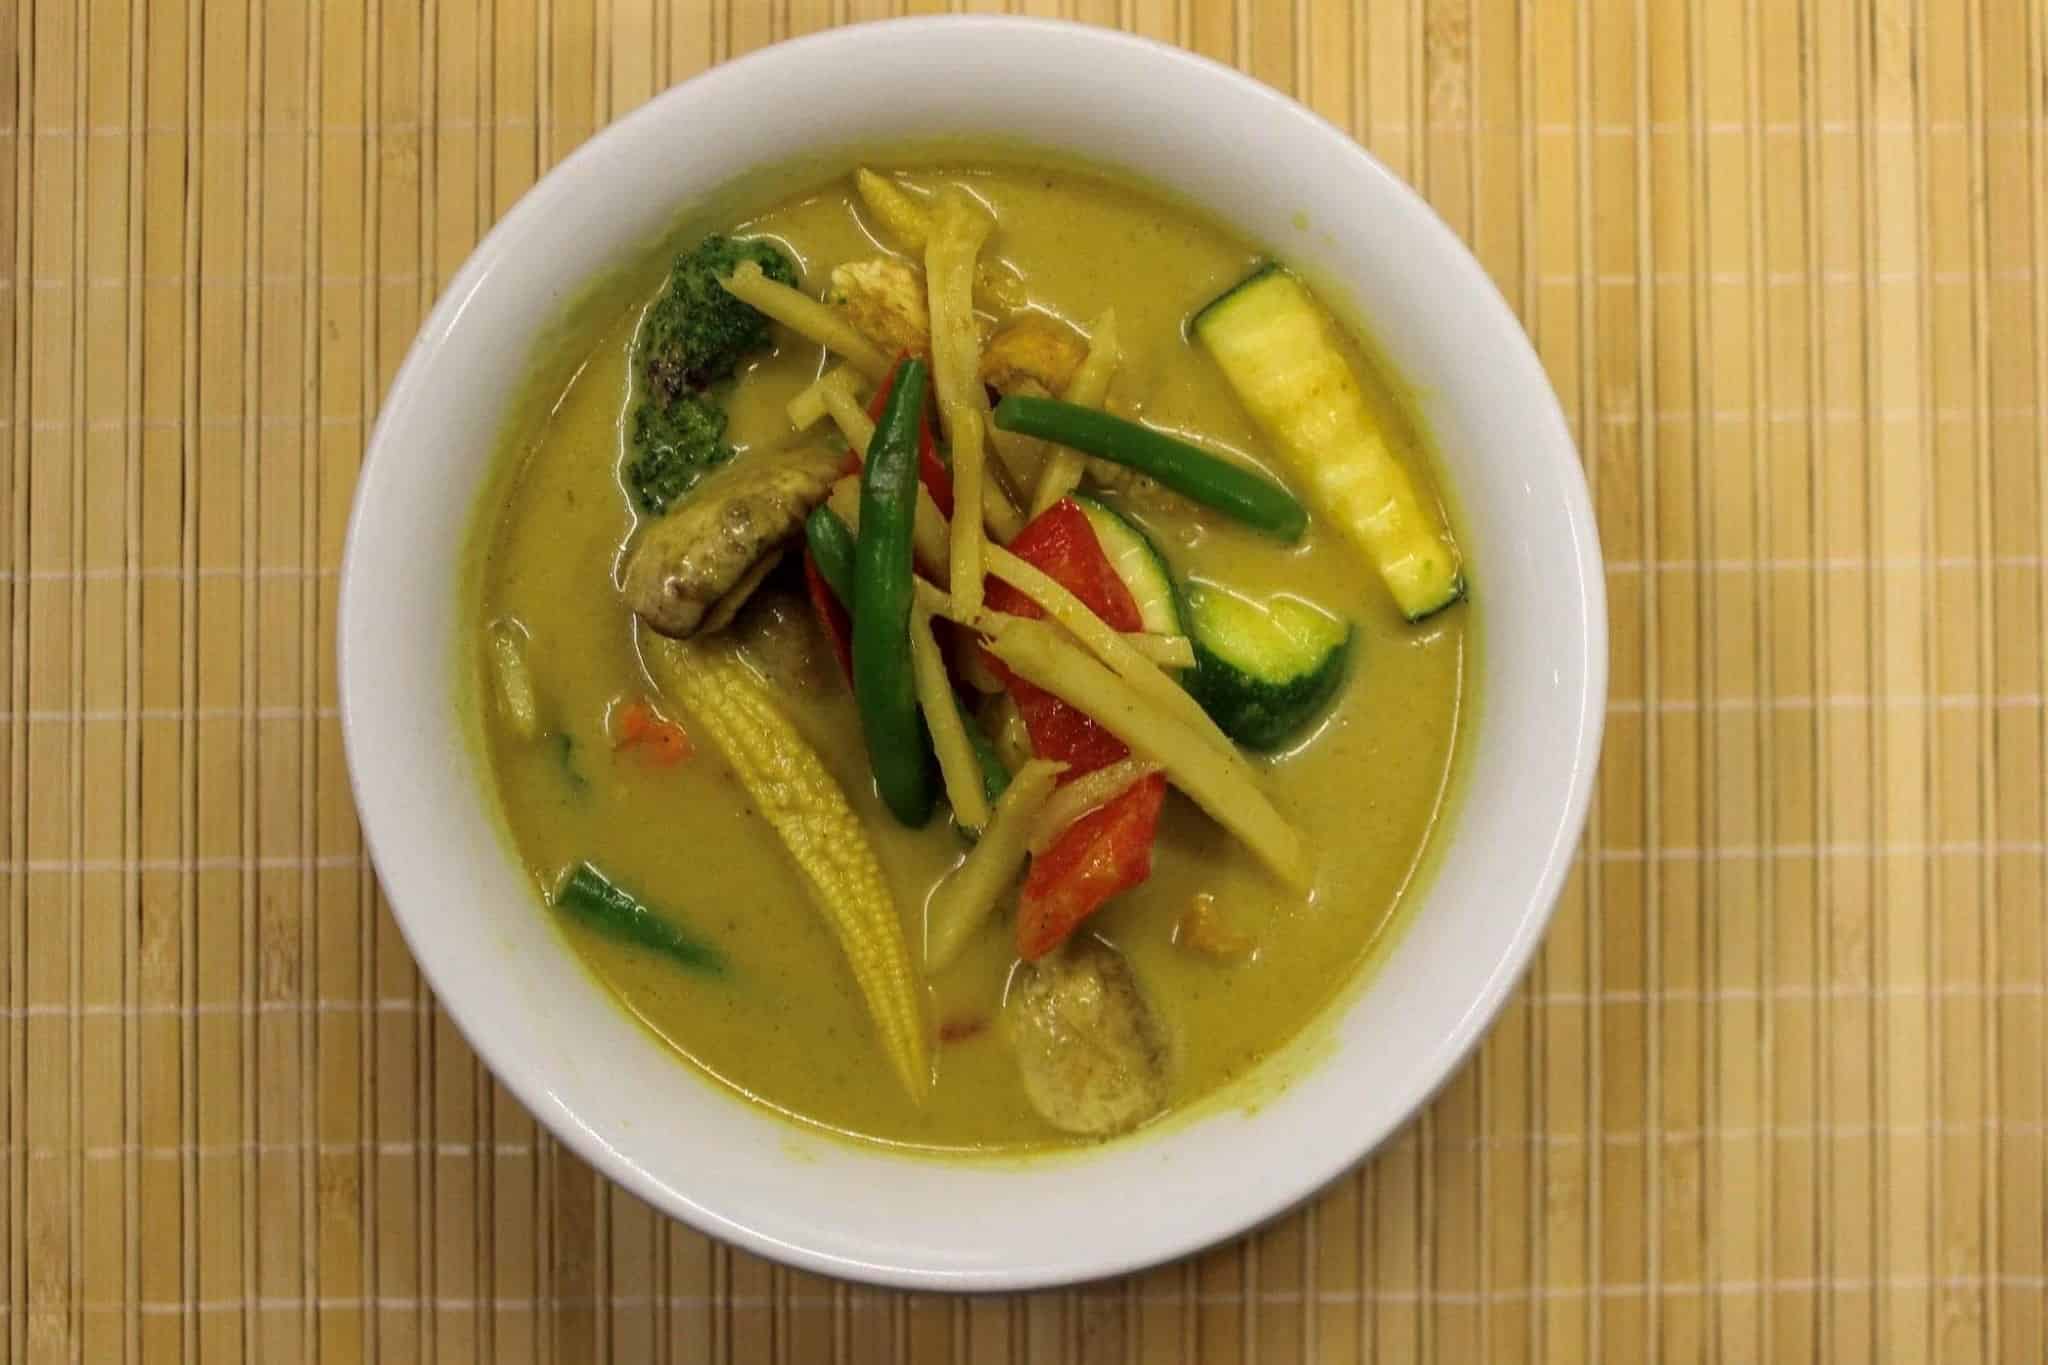 A Gluten Free Thai Yellow curry with coconut milk, onion and potato, or sweet potato in a decorative bowl.